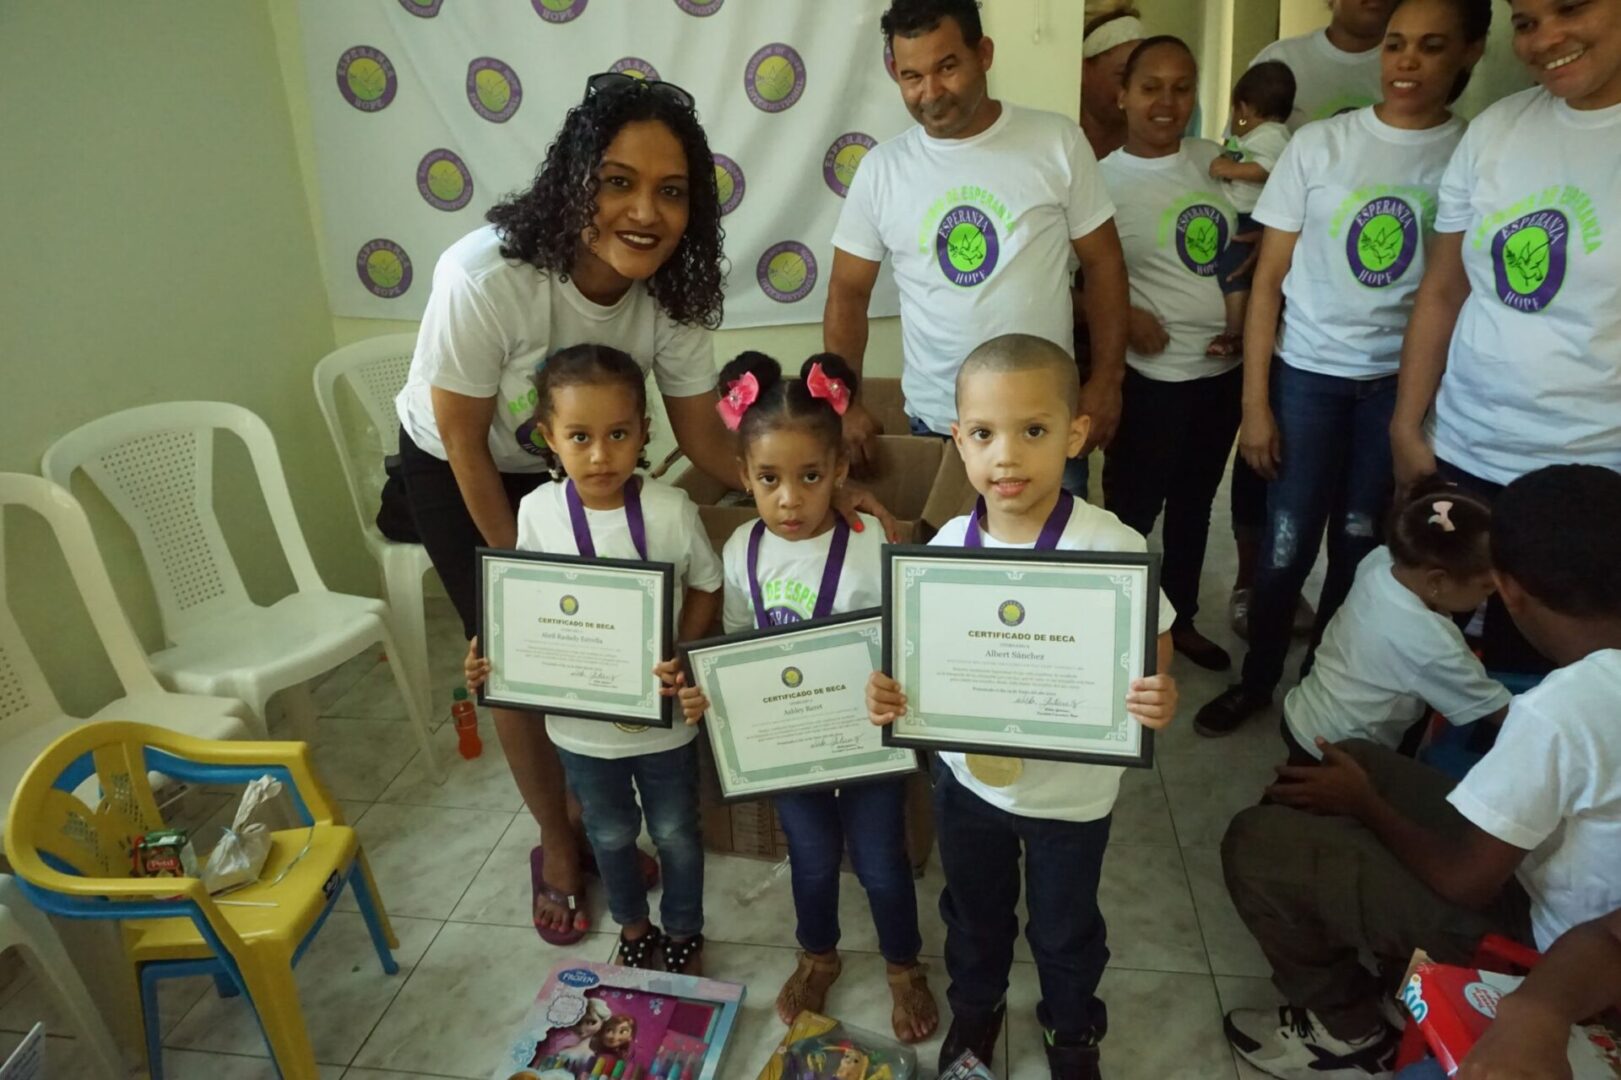 Two little girls and a little boy wearing their medals and showing their certificates, smiling